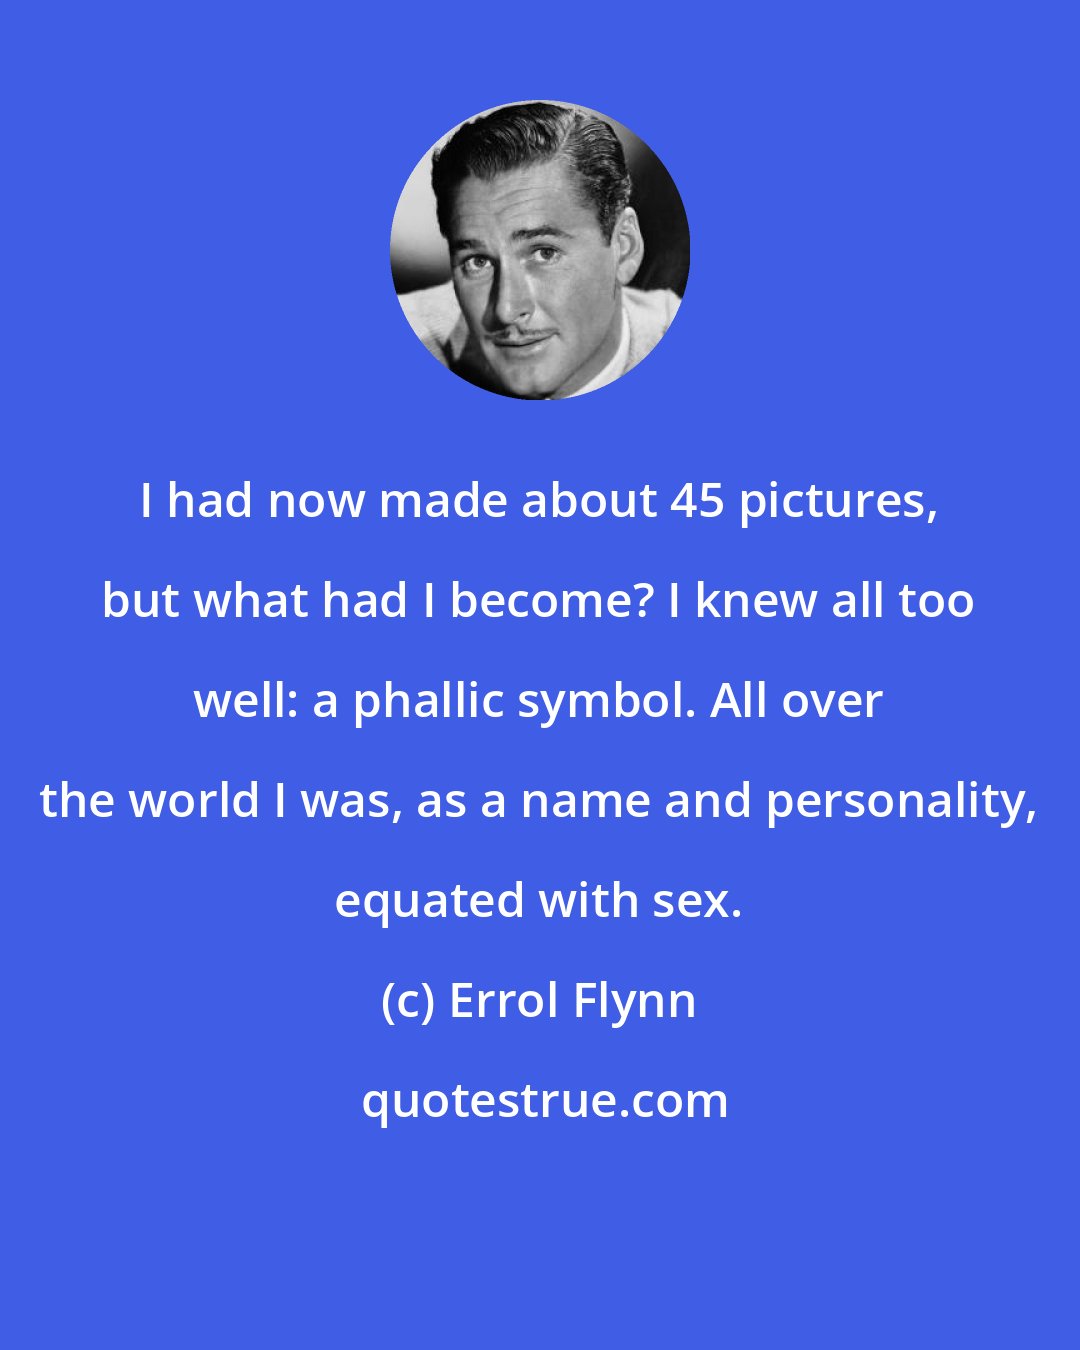 Errol Flynn: I had now made about 45 pictures, but what had I become? I knew all too well: a phallic symbol. All over the world I was, as a name and personality, equated with sex.